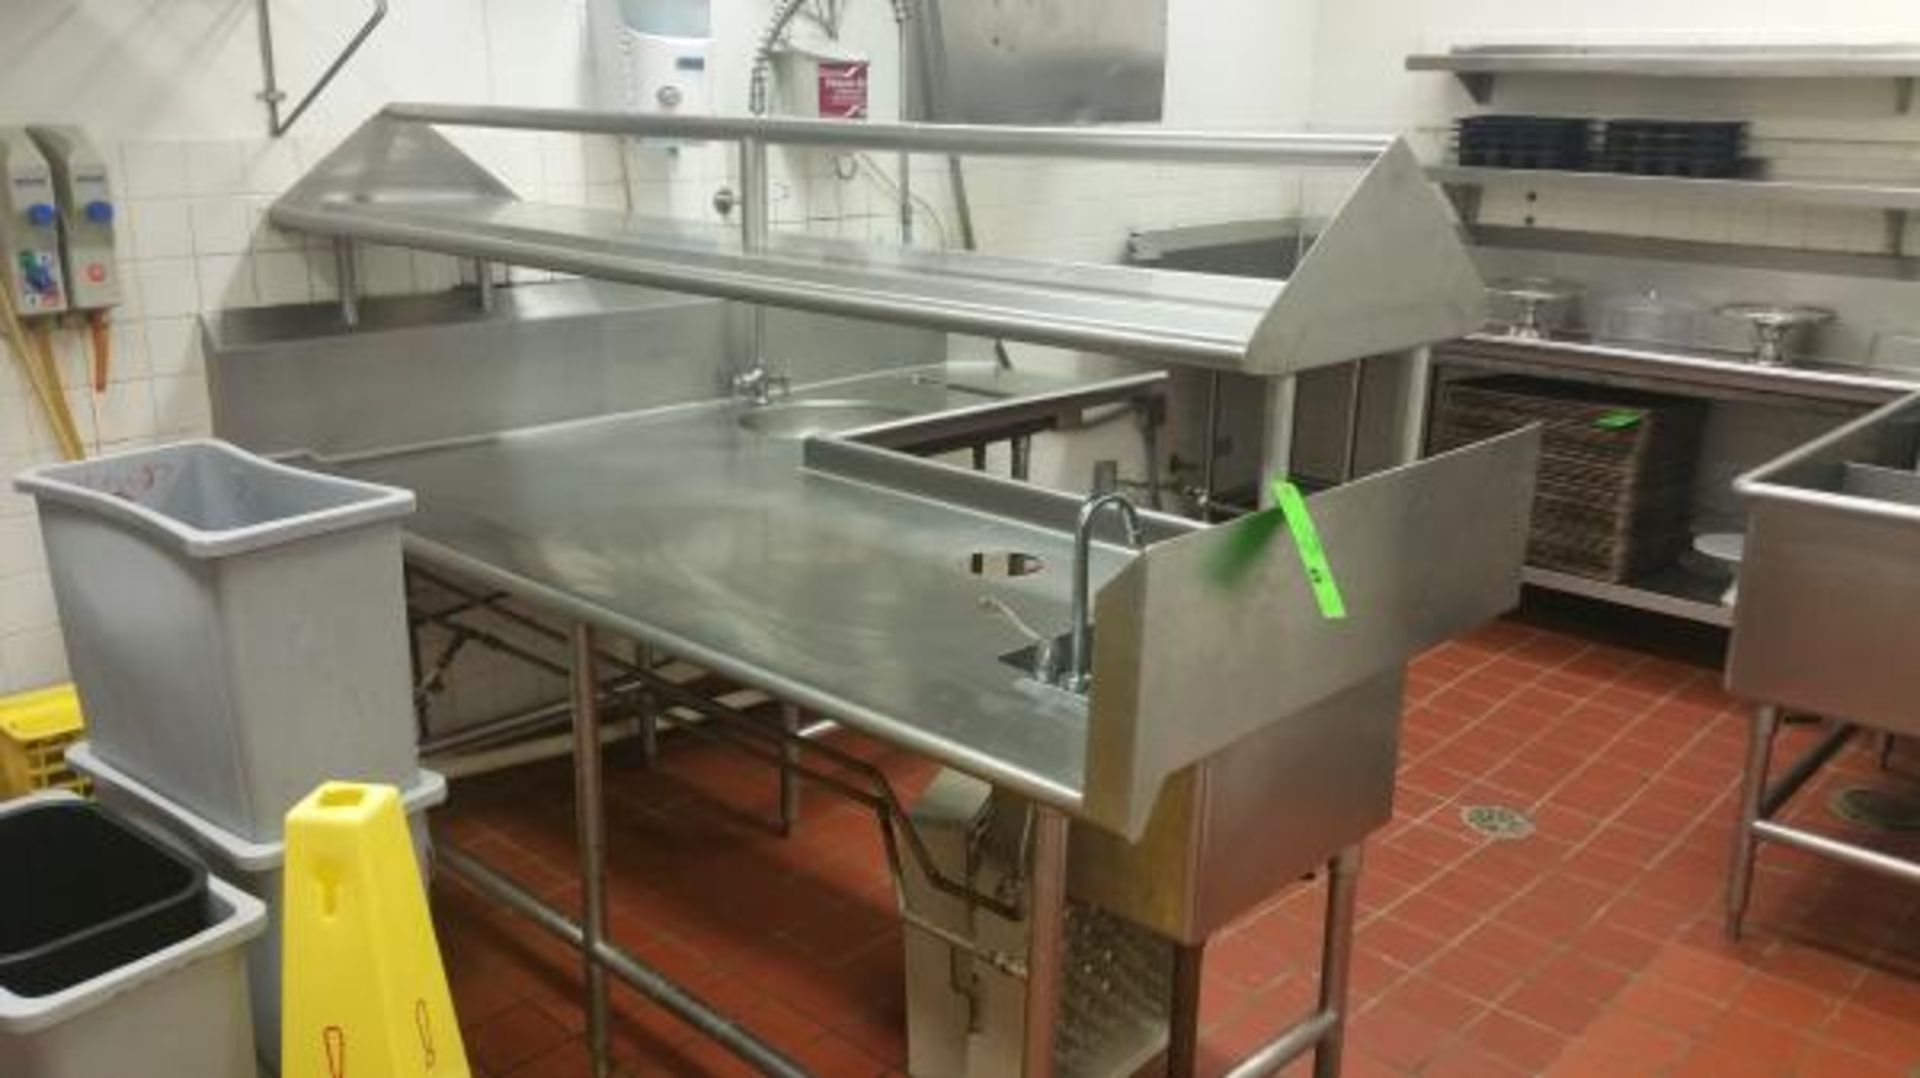 S/S L Shaped Dish Washing Station 88"Long x 36" Deep and 4'x30" includes (2) Sinks one with High